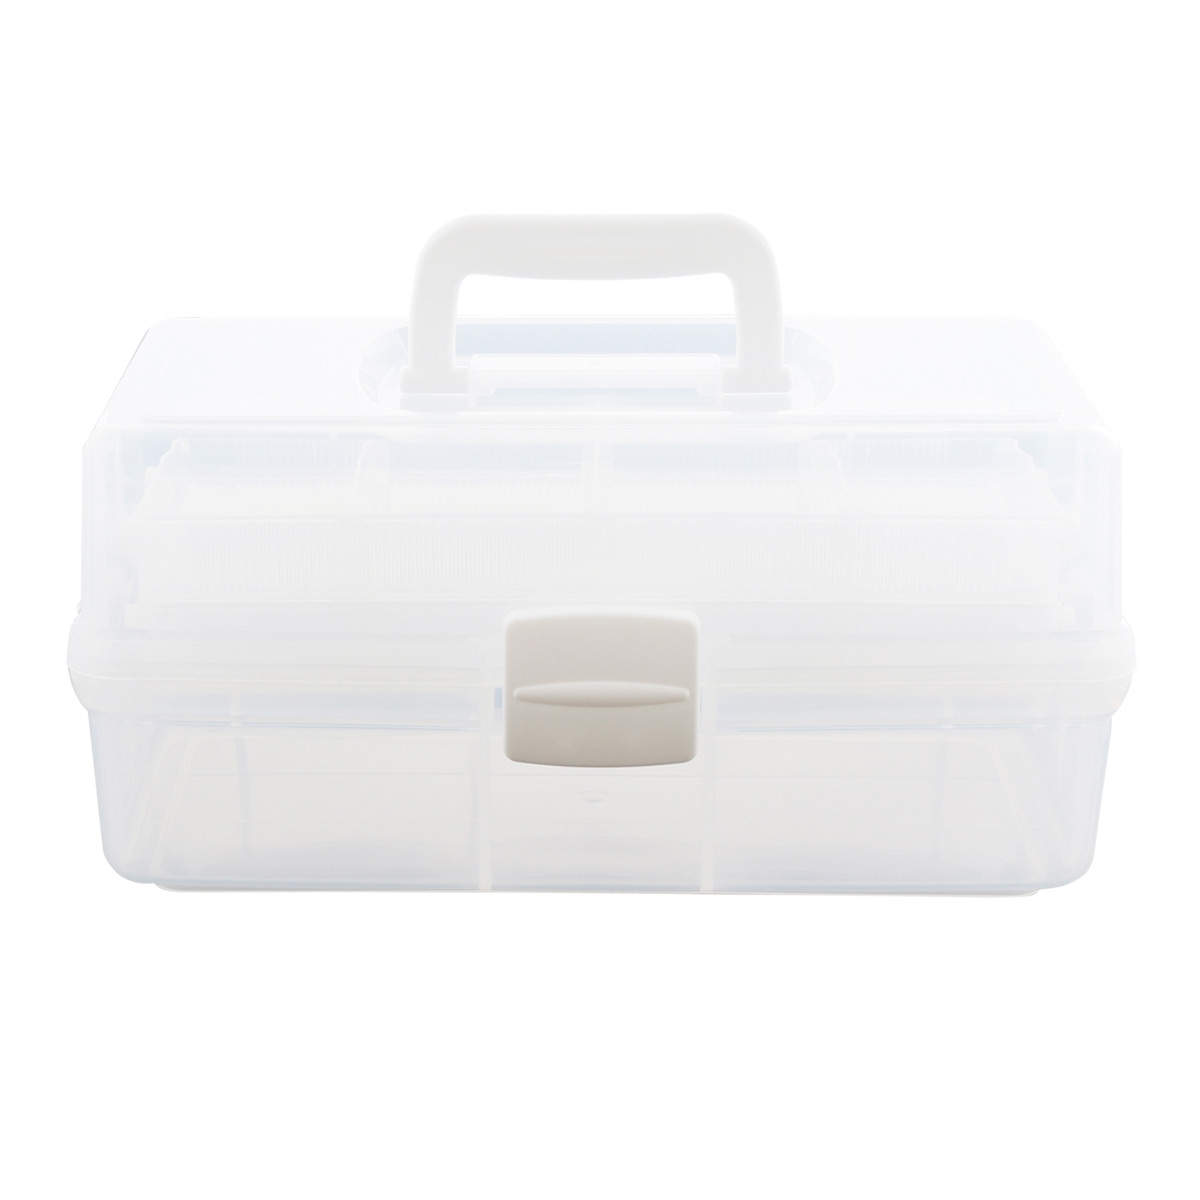 https://www.containerstore.com/catalogimages/410829/10082788-Hobby-Box-White-Clear-VEN1.jpg